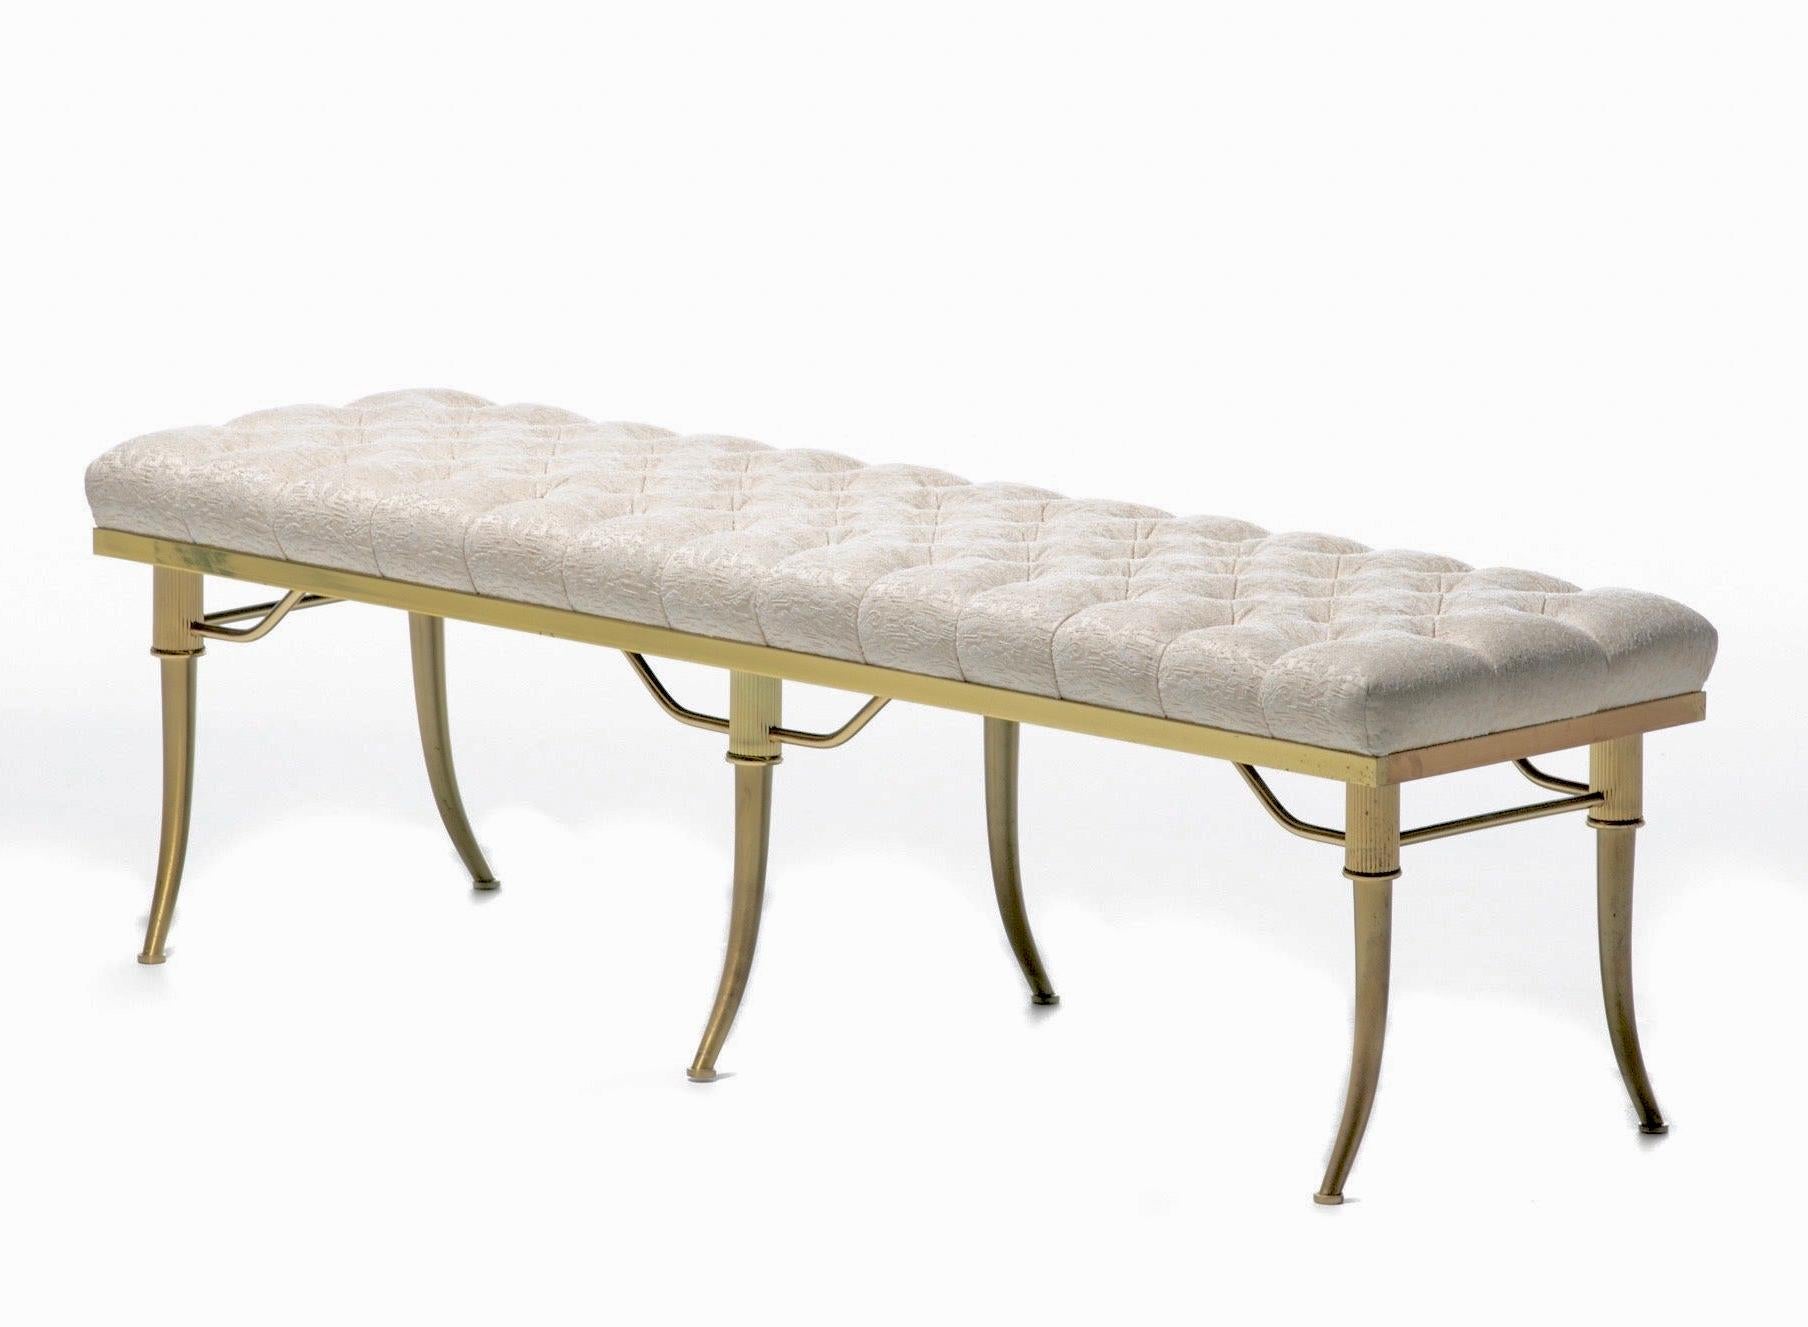 Hollywood Regency Billy Haines Brass Klismos Leg Bench with Tufted Ivory Upholstery, circa 1960